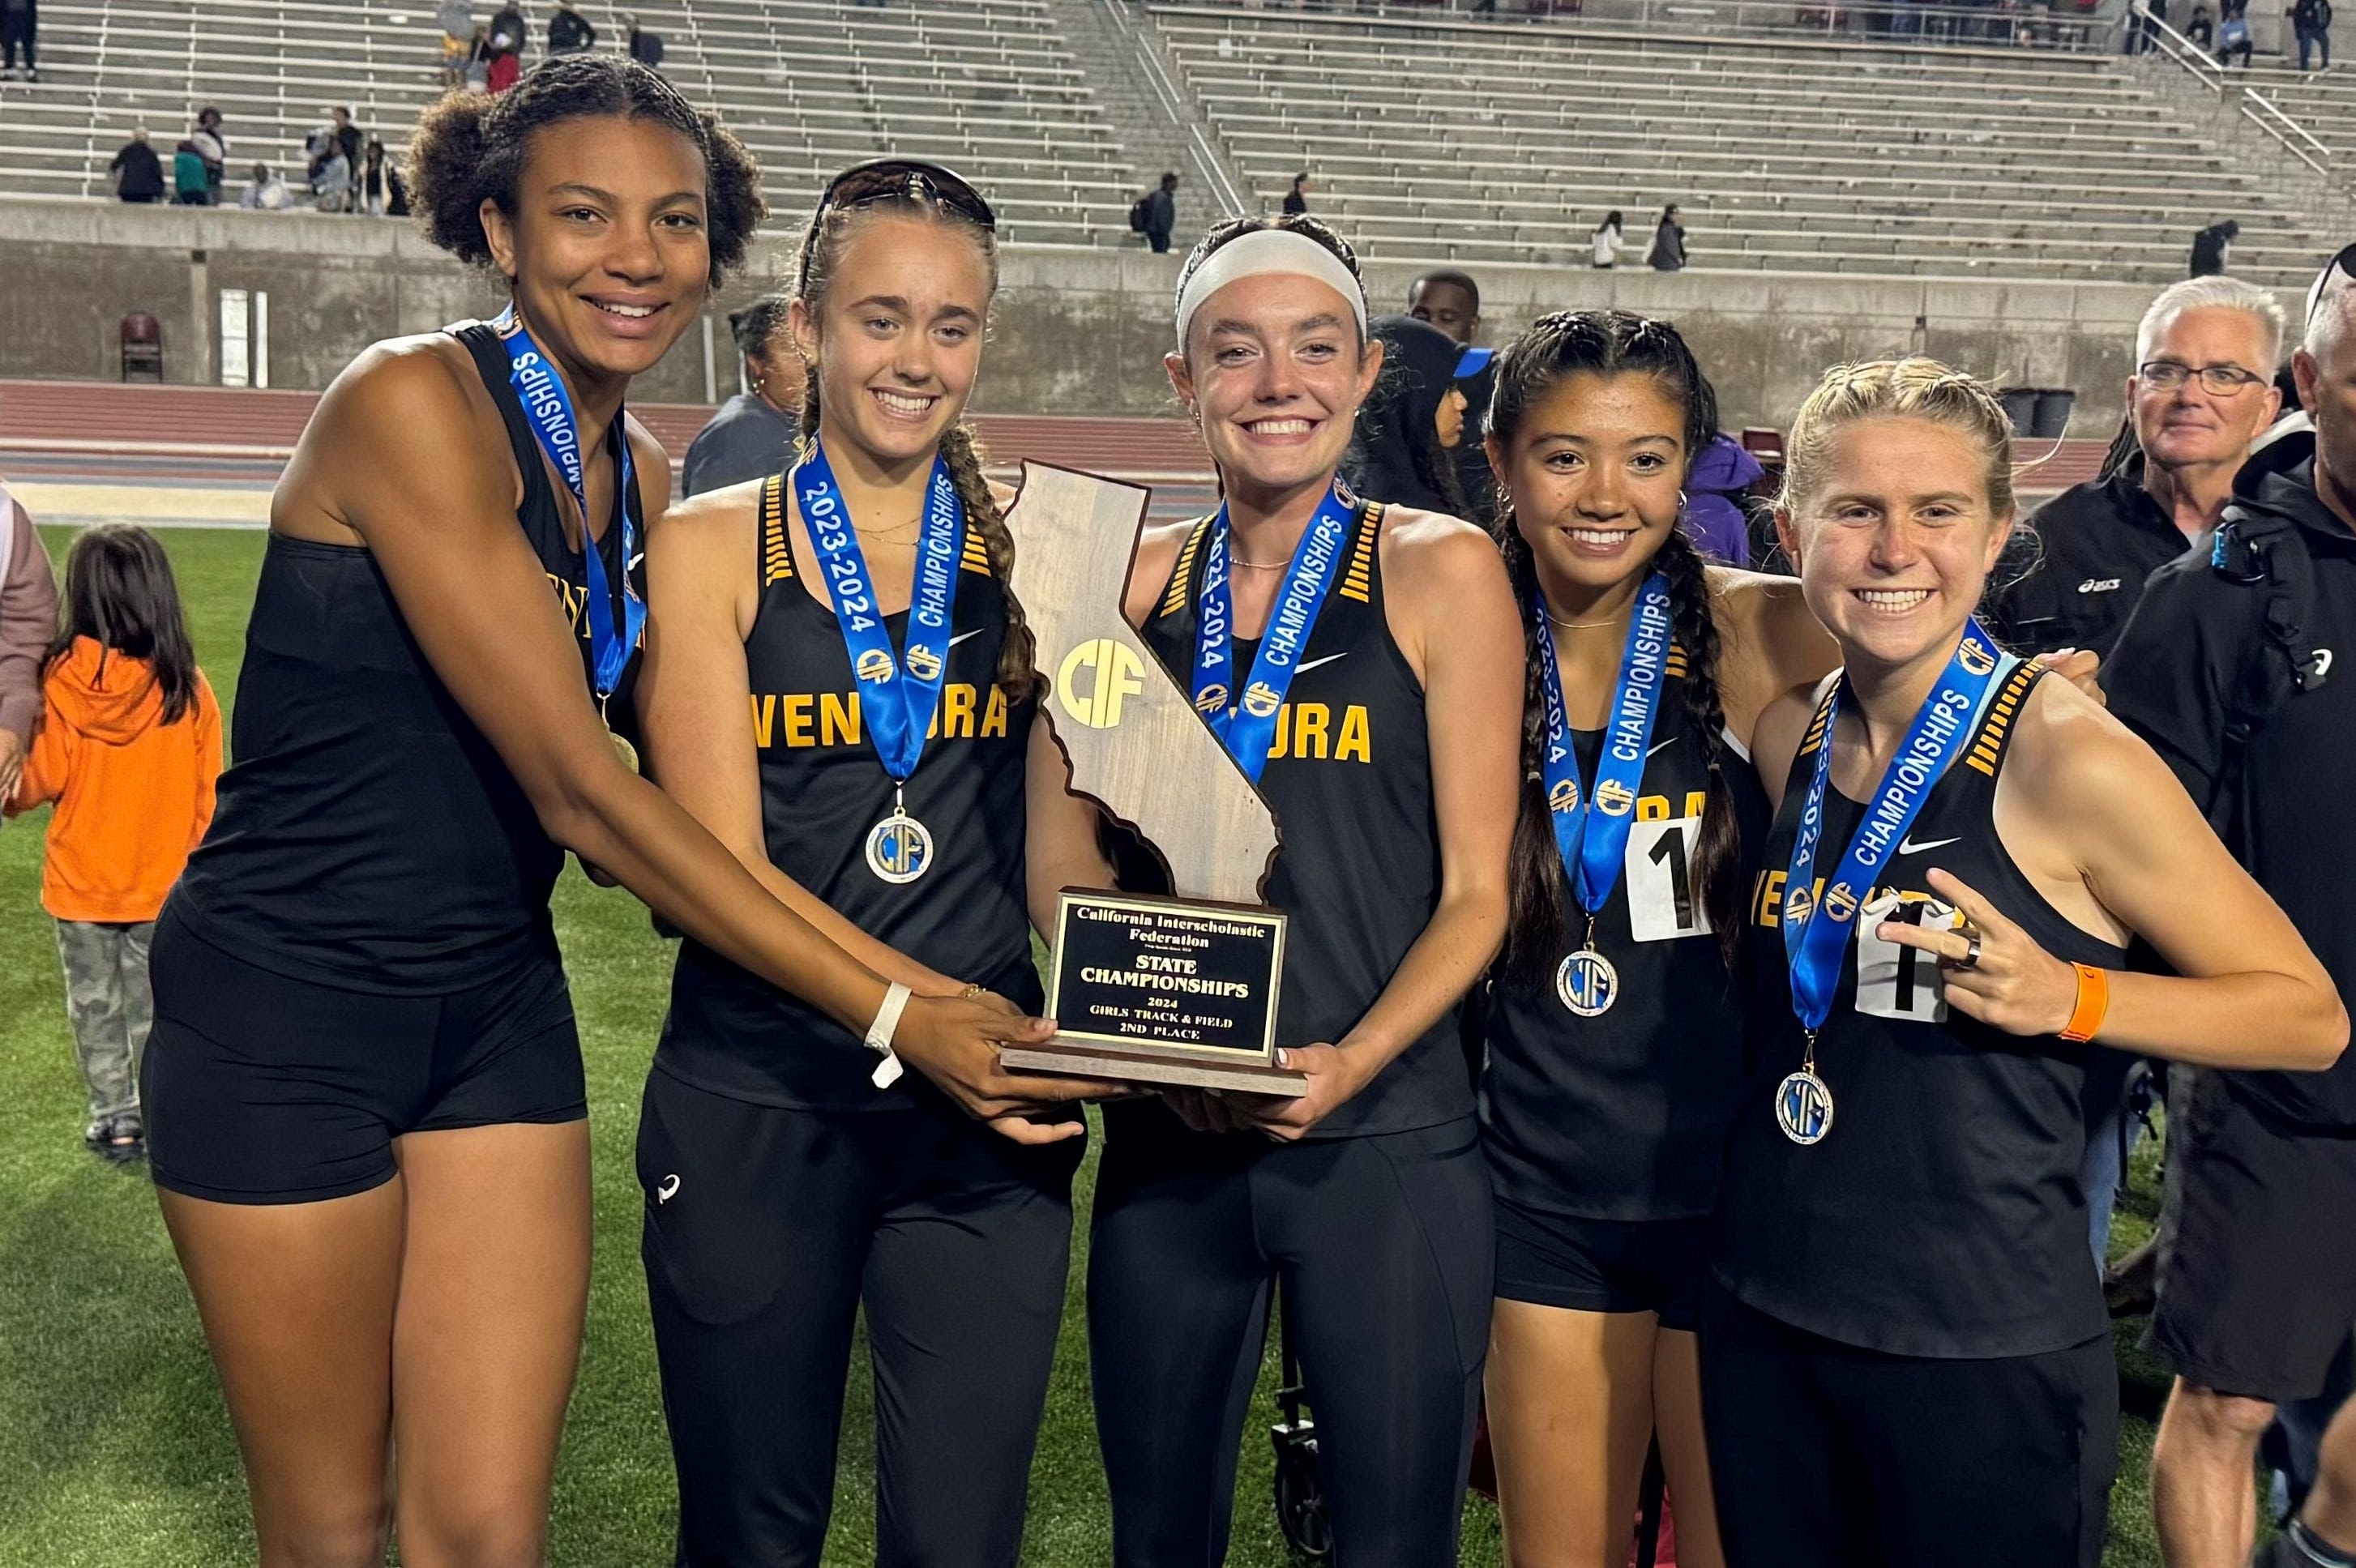 Ventura girls win three titles, finish second as team at state track championships